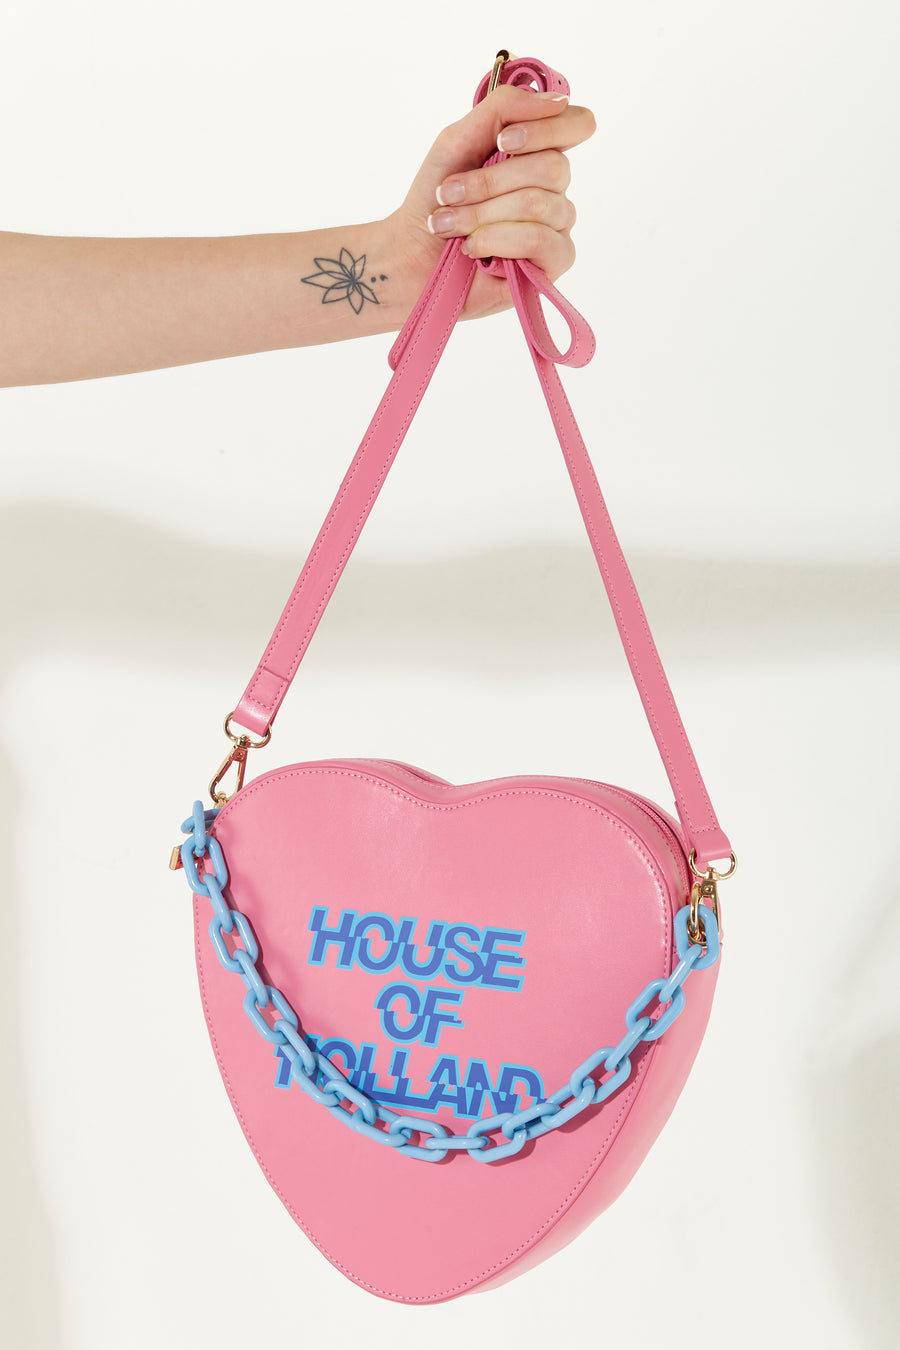 Radley pink heart shaped bag in collaboration with the British